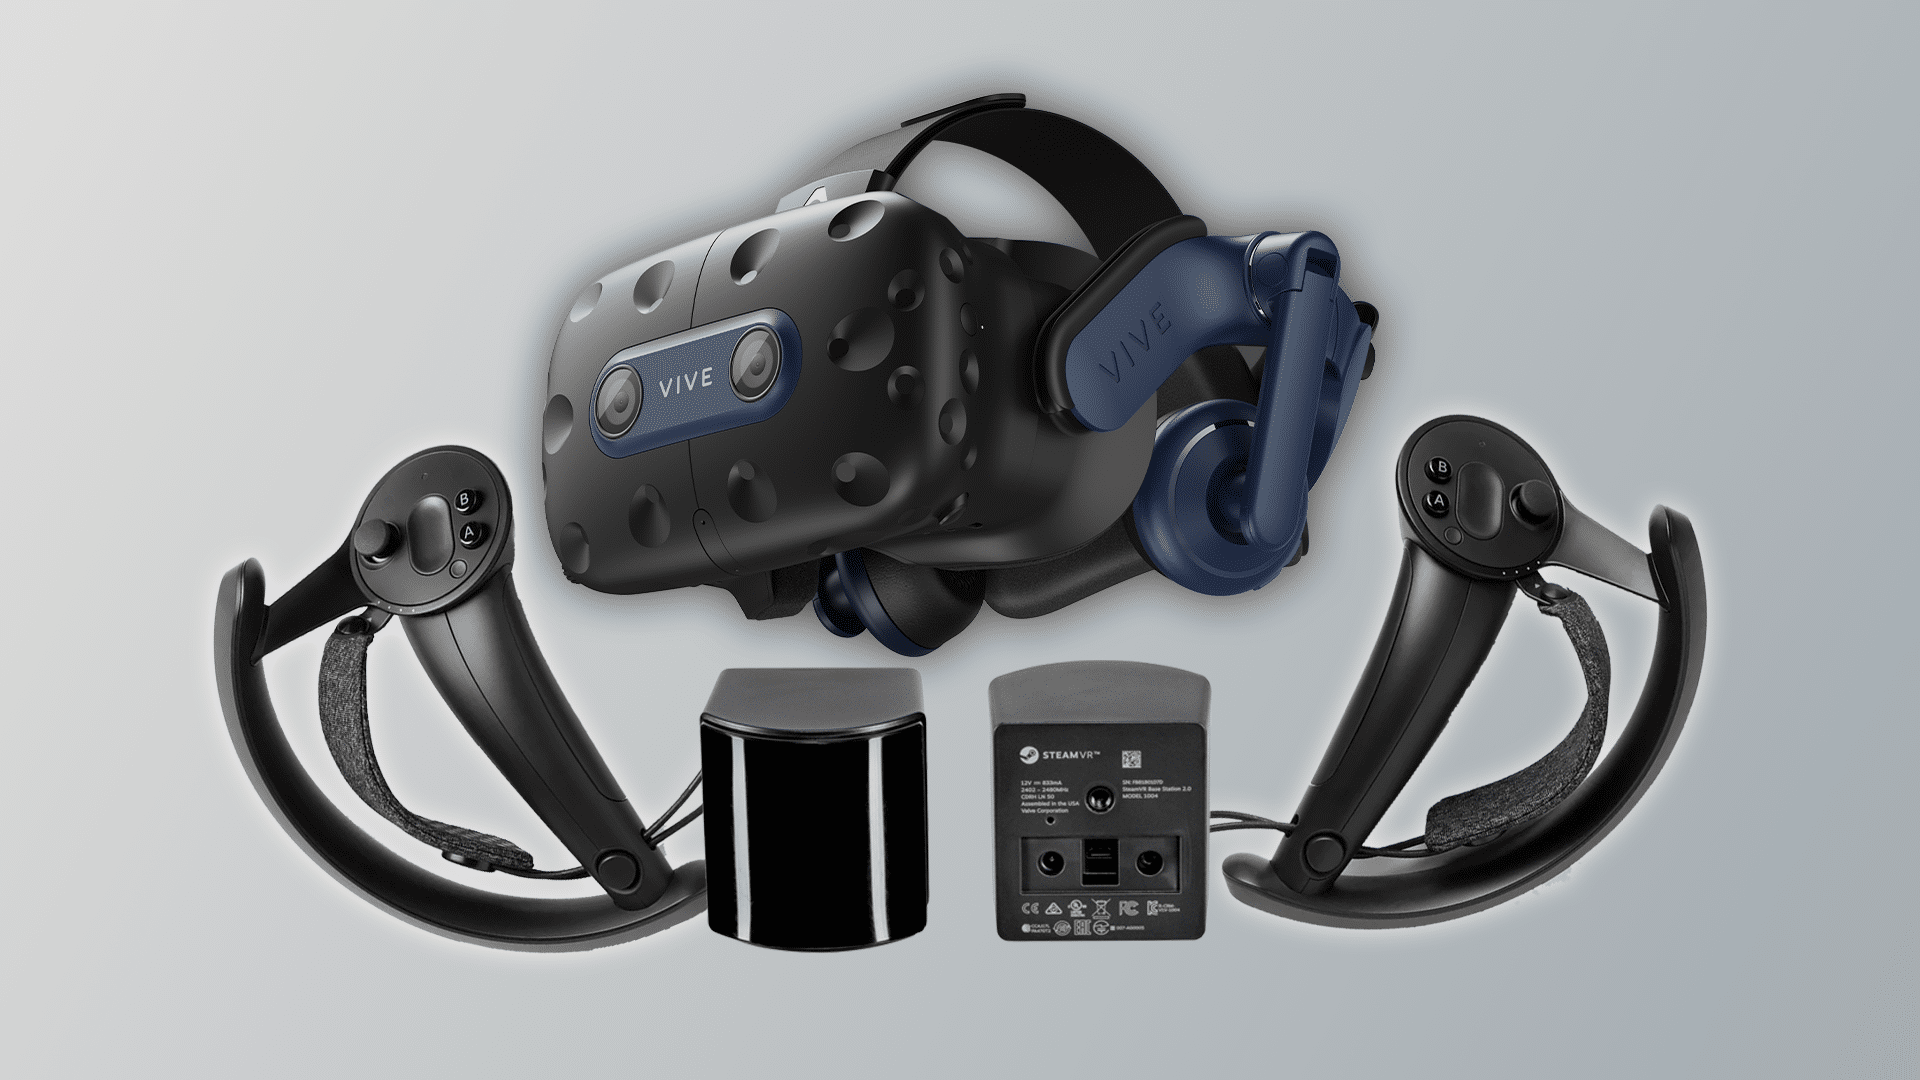 Vive 2 With Index Controllers $100 Than HTC's Full Kit